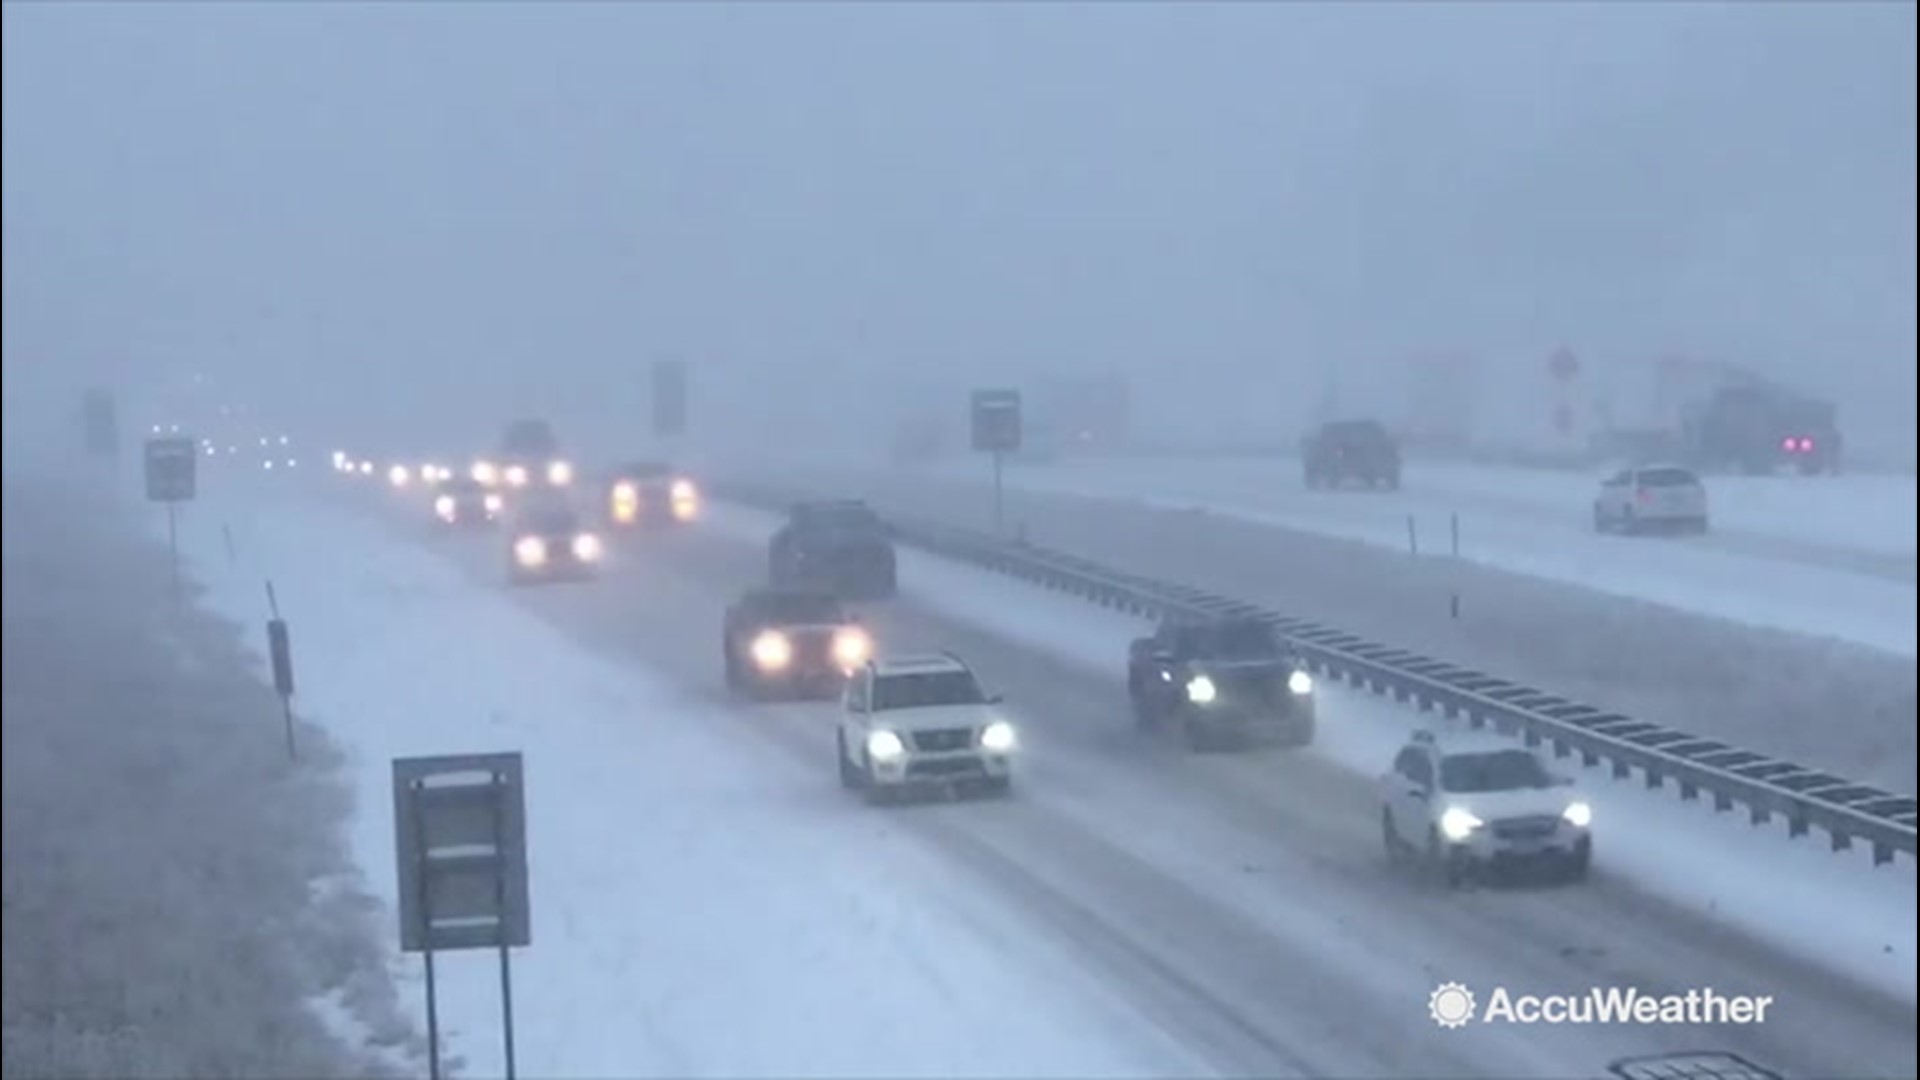 AccuWeather's Reed Timmer reports from I-70, west of Denver, Colorado, showing heavy snow dropping on slow-driving traffic.